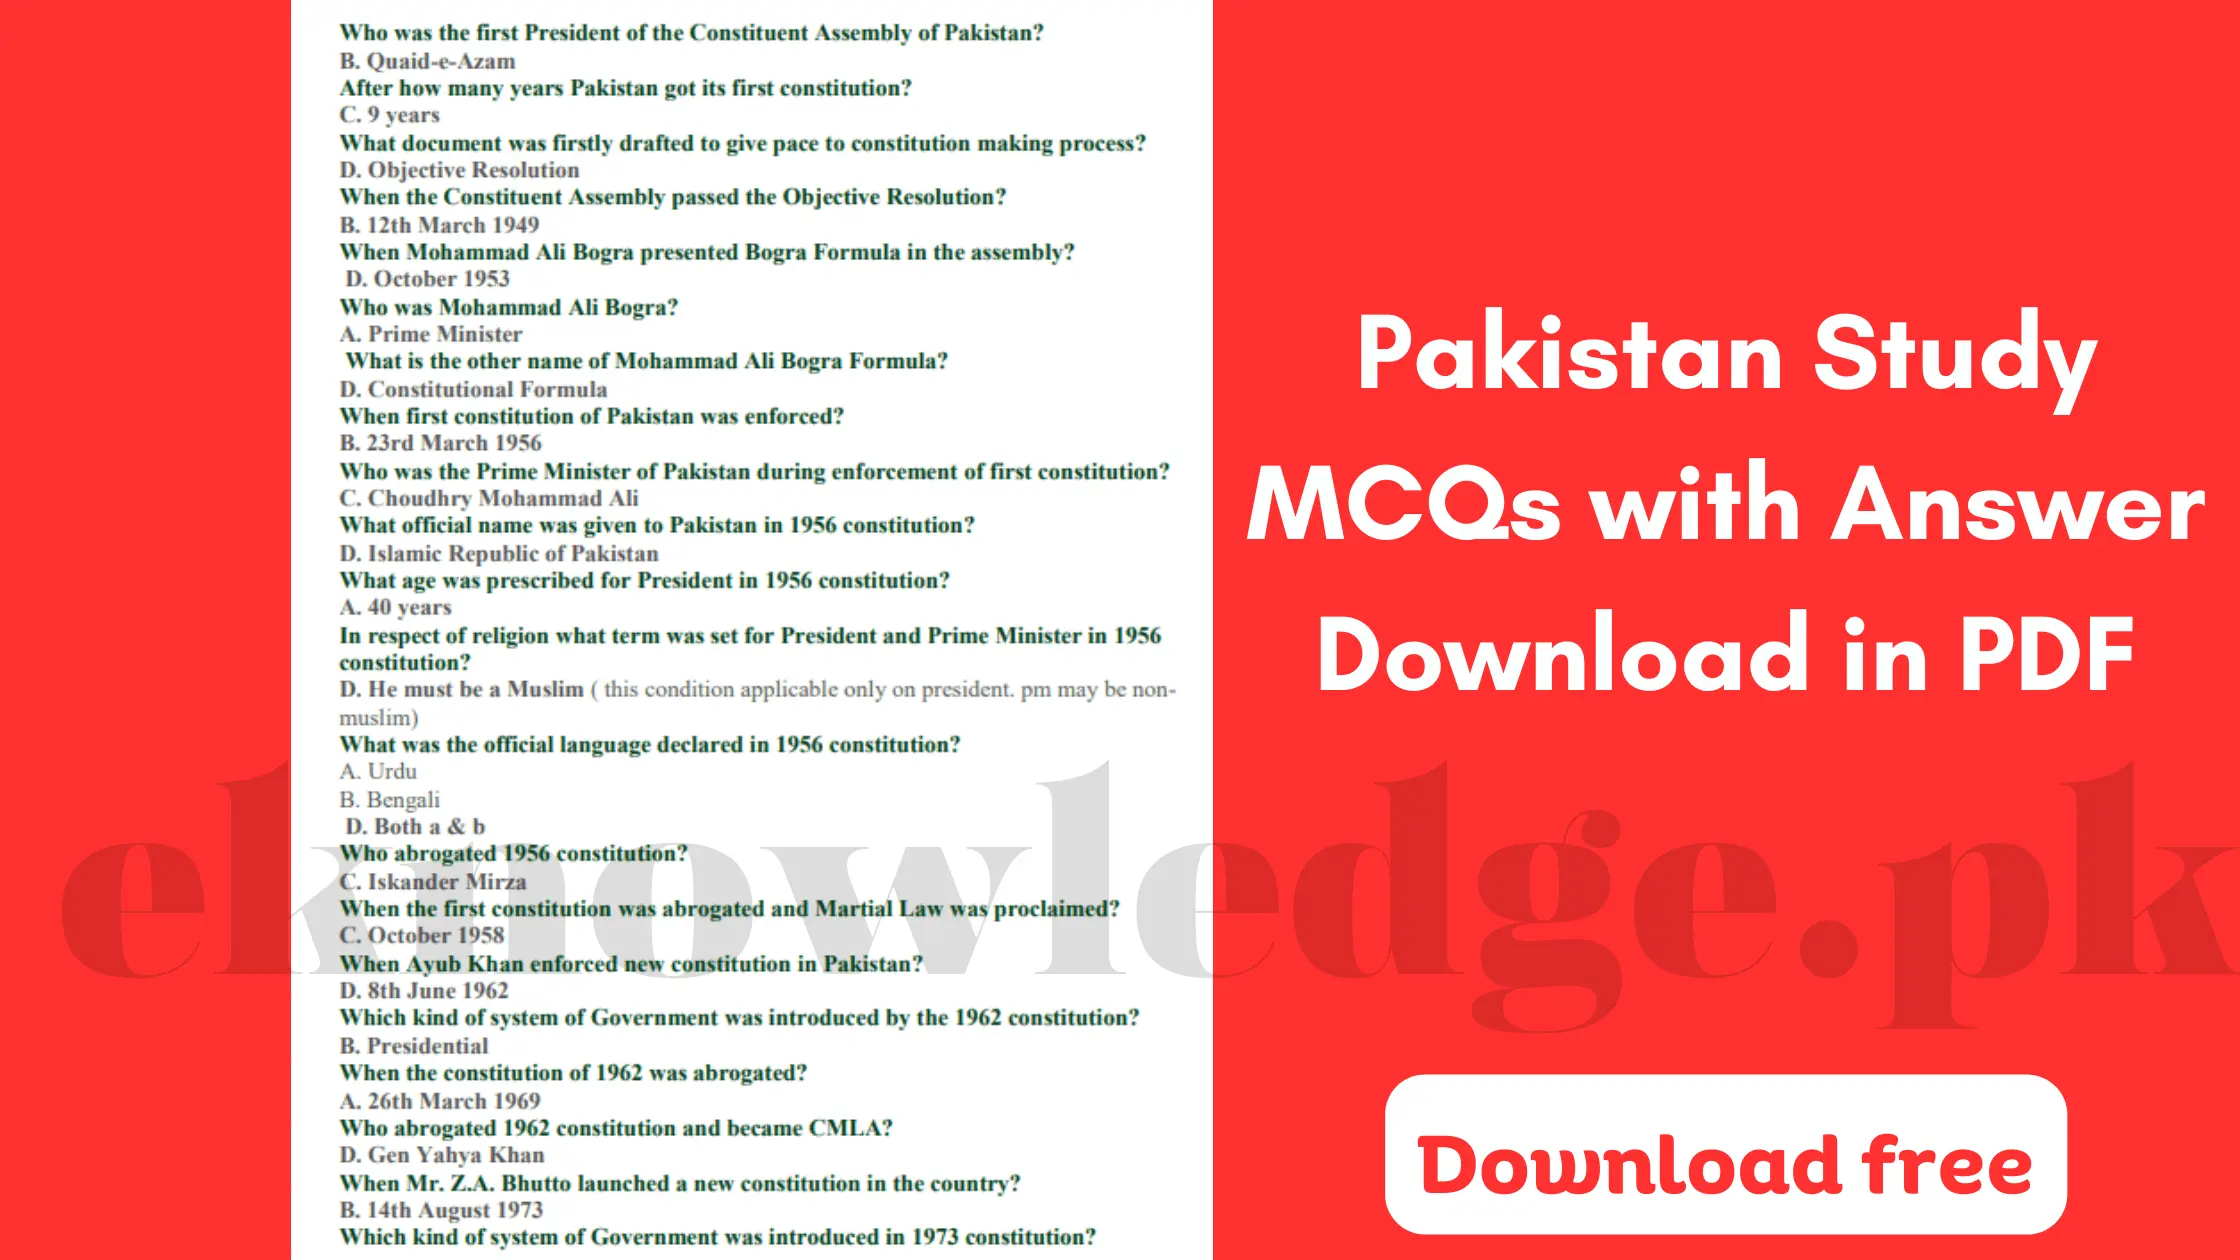 Pakistan Study MCQs with Answer Download in PDF